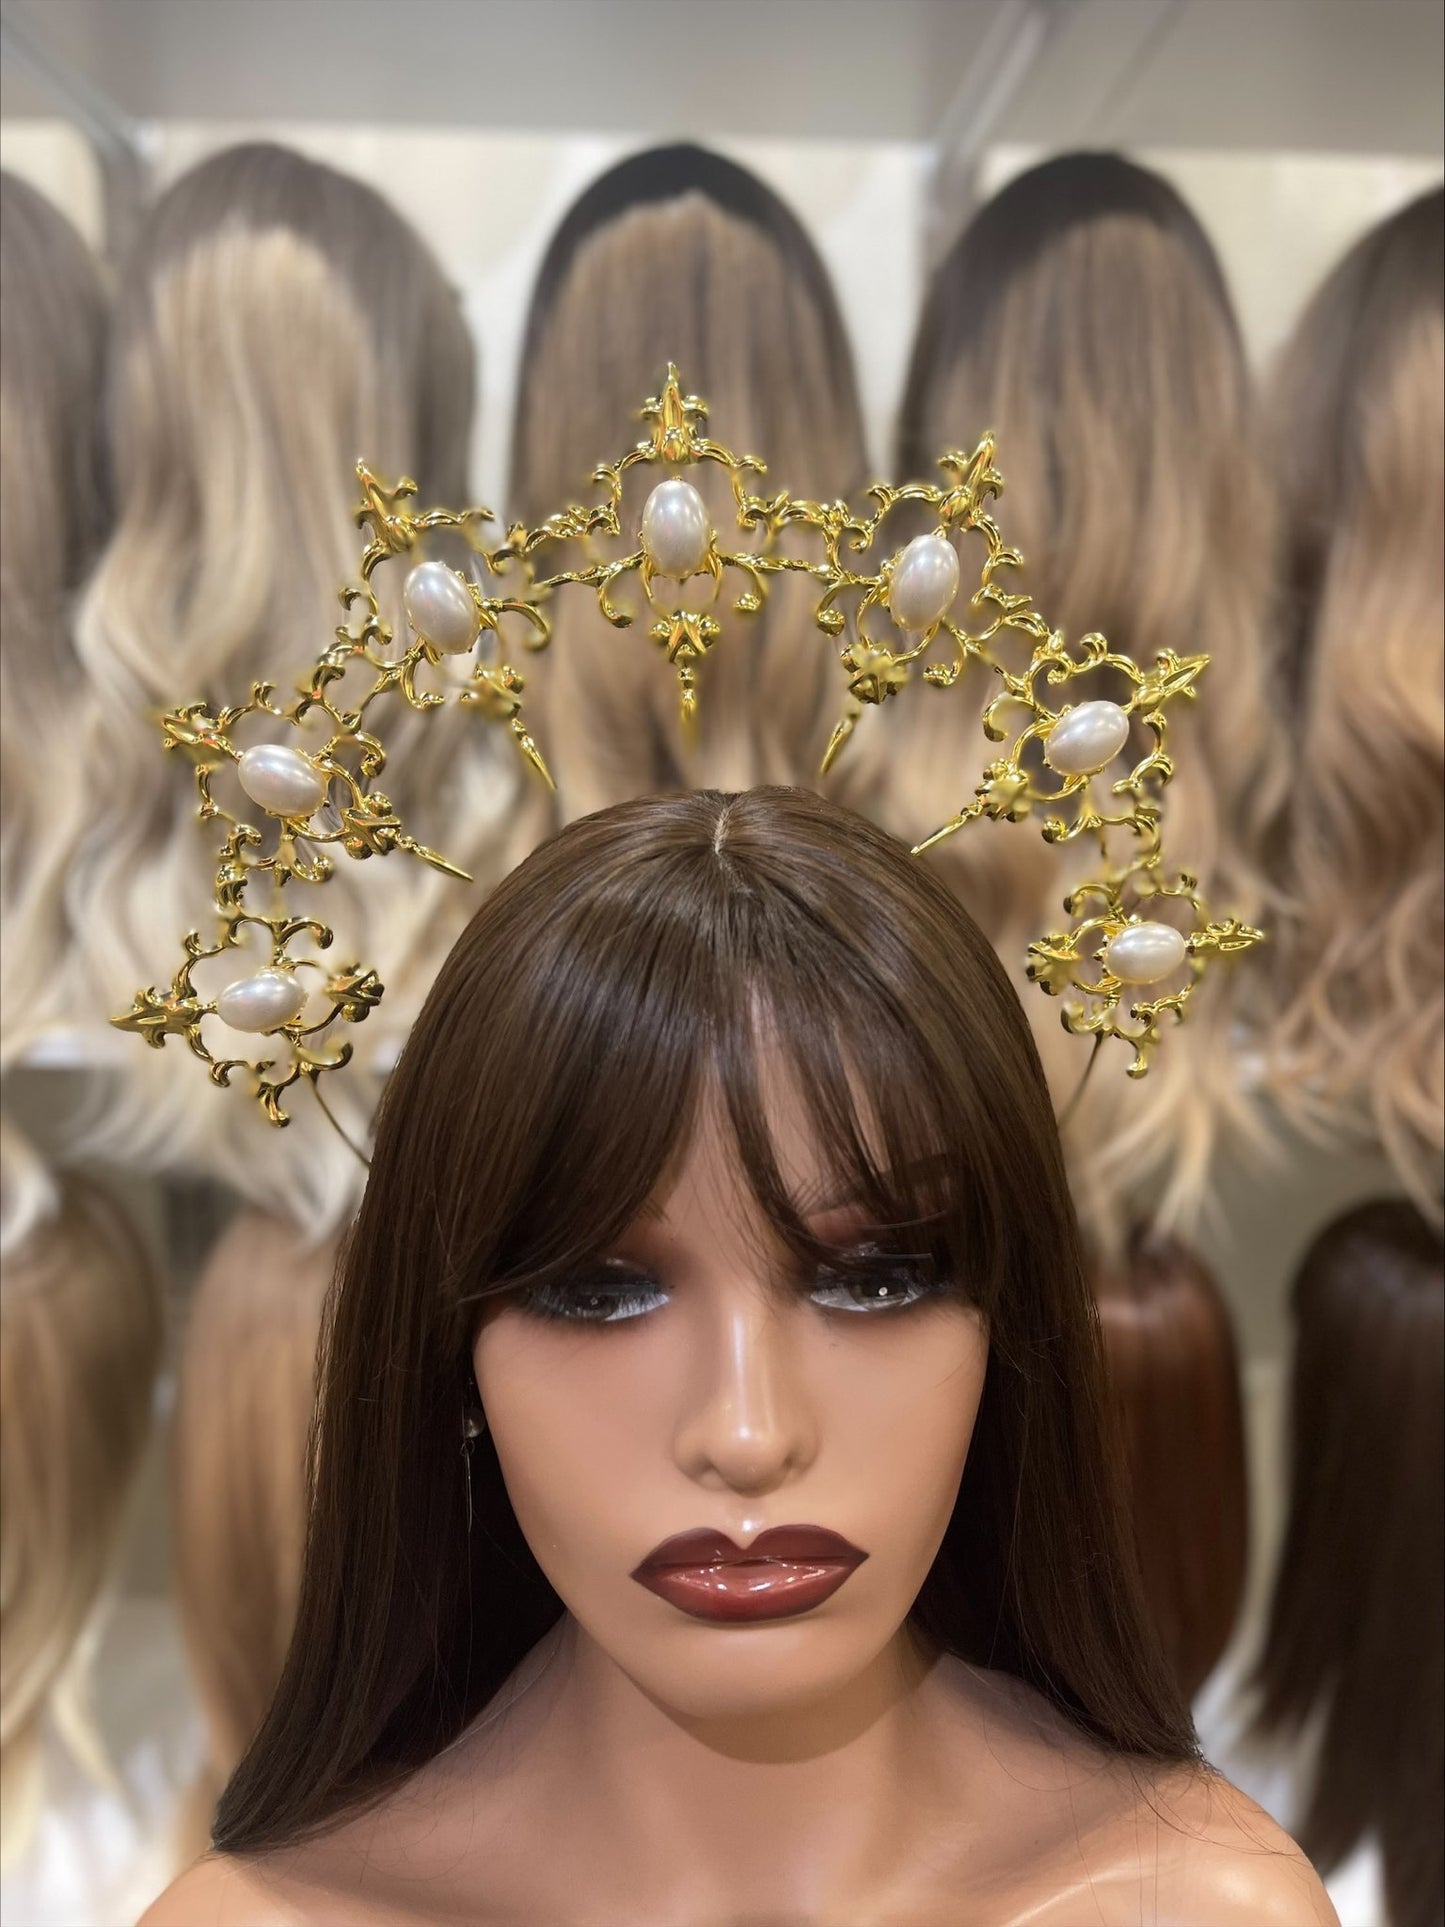 Golden Goddess Hair Crown With White Pearls